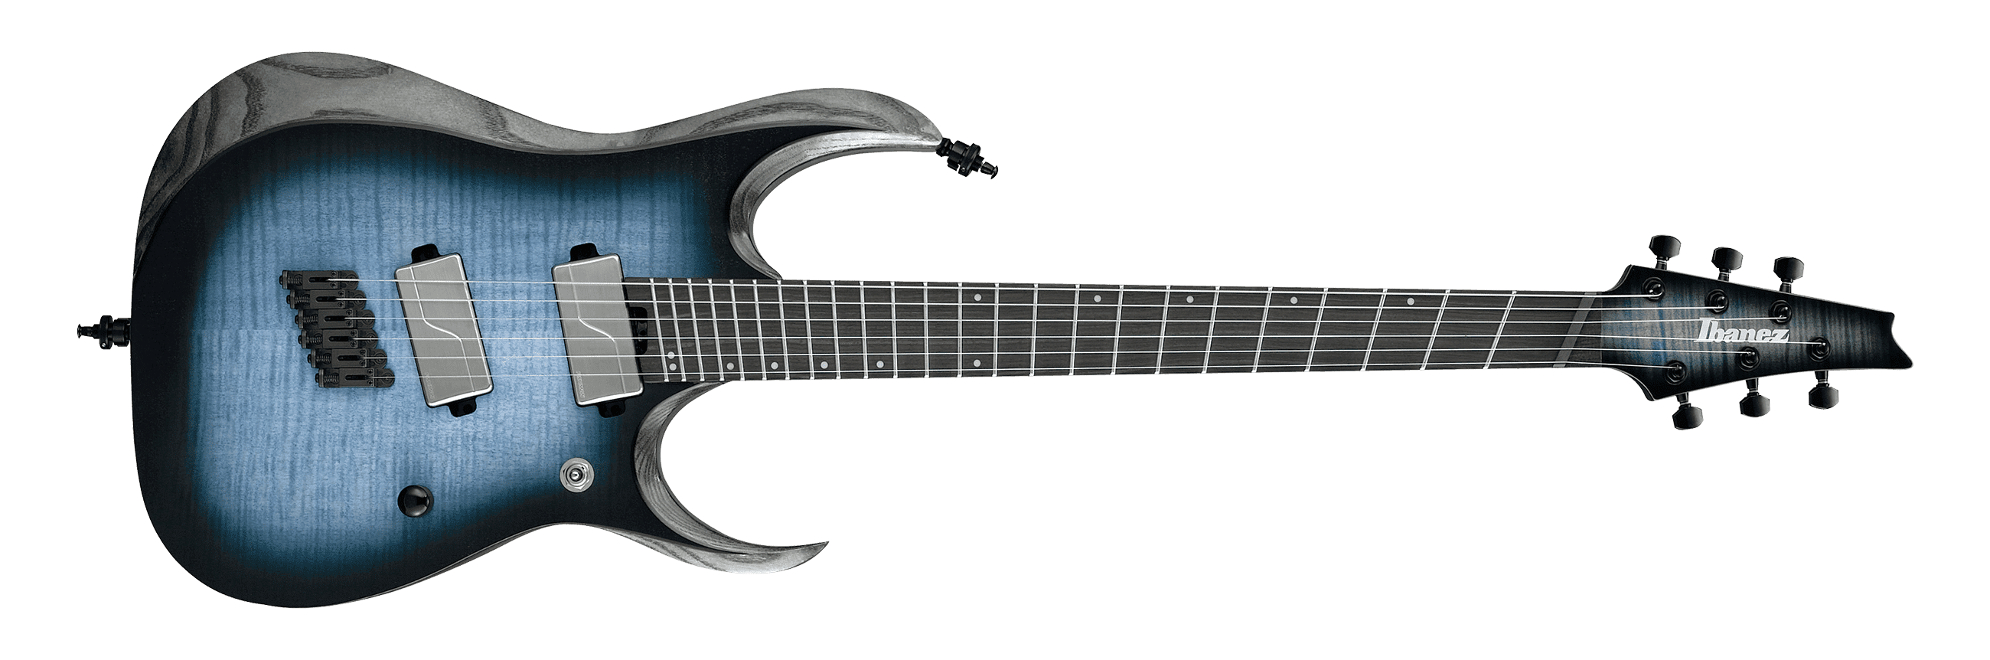 Ibanez RGD61ALMS RGD Axion Label Solidbody Electric Guitar with Layered Ash in Cerulean Blue Burst Low Gloss - CLL Cerulean Blue Burst Low Gloss for sale